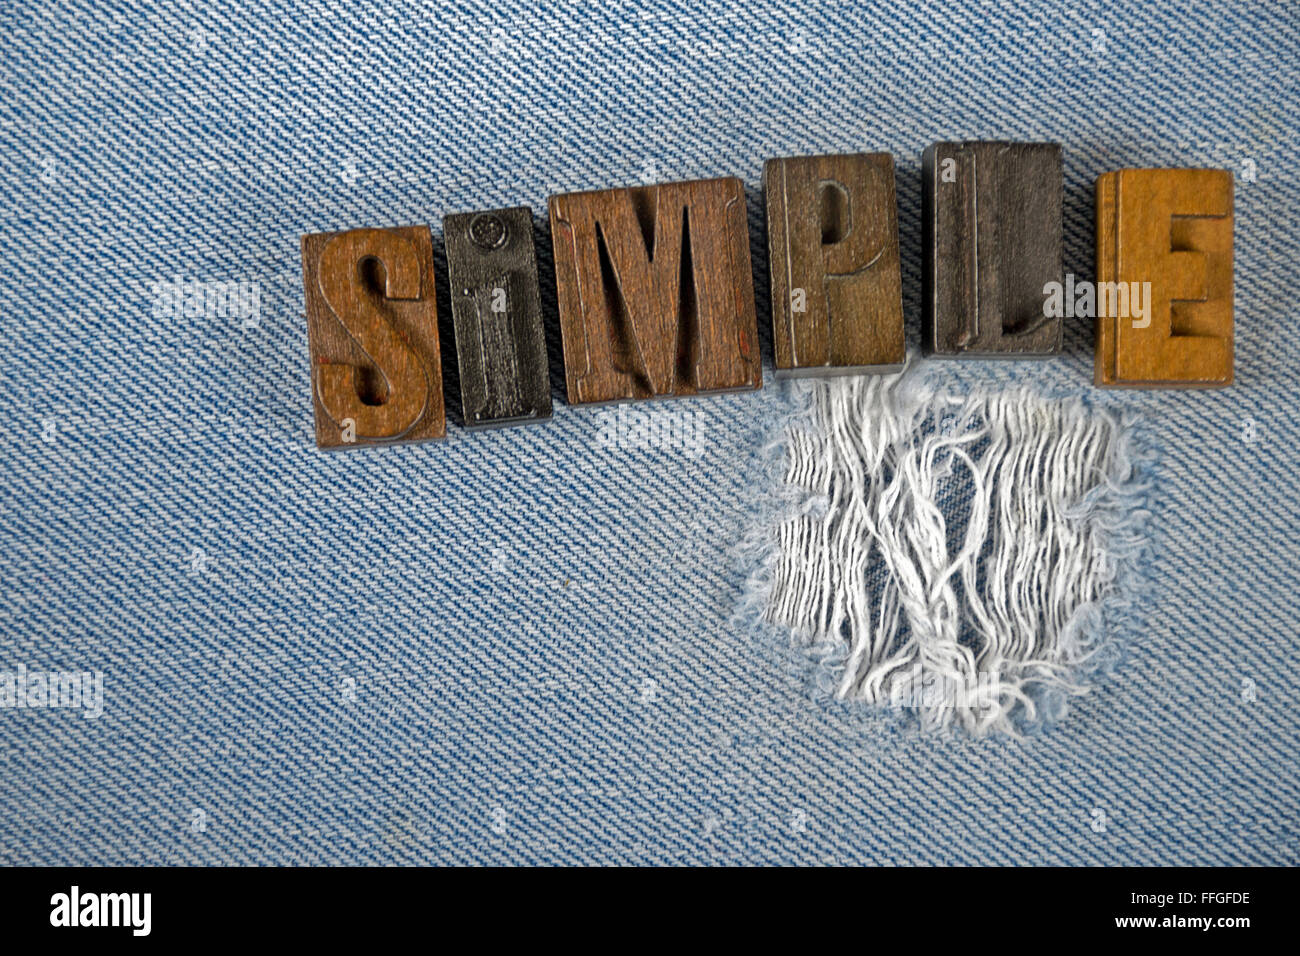 The word simple in wooden letterpress type on frayed denim fabric. Stock Photo